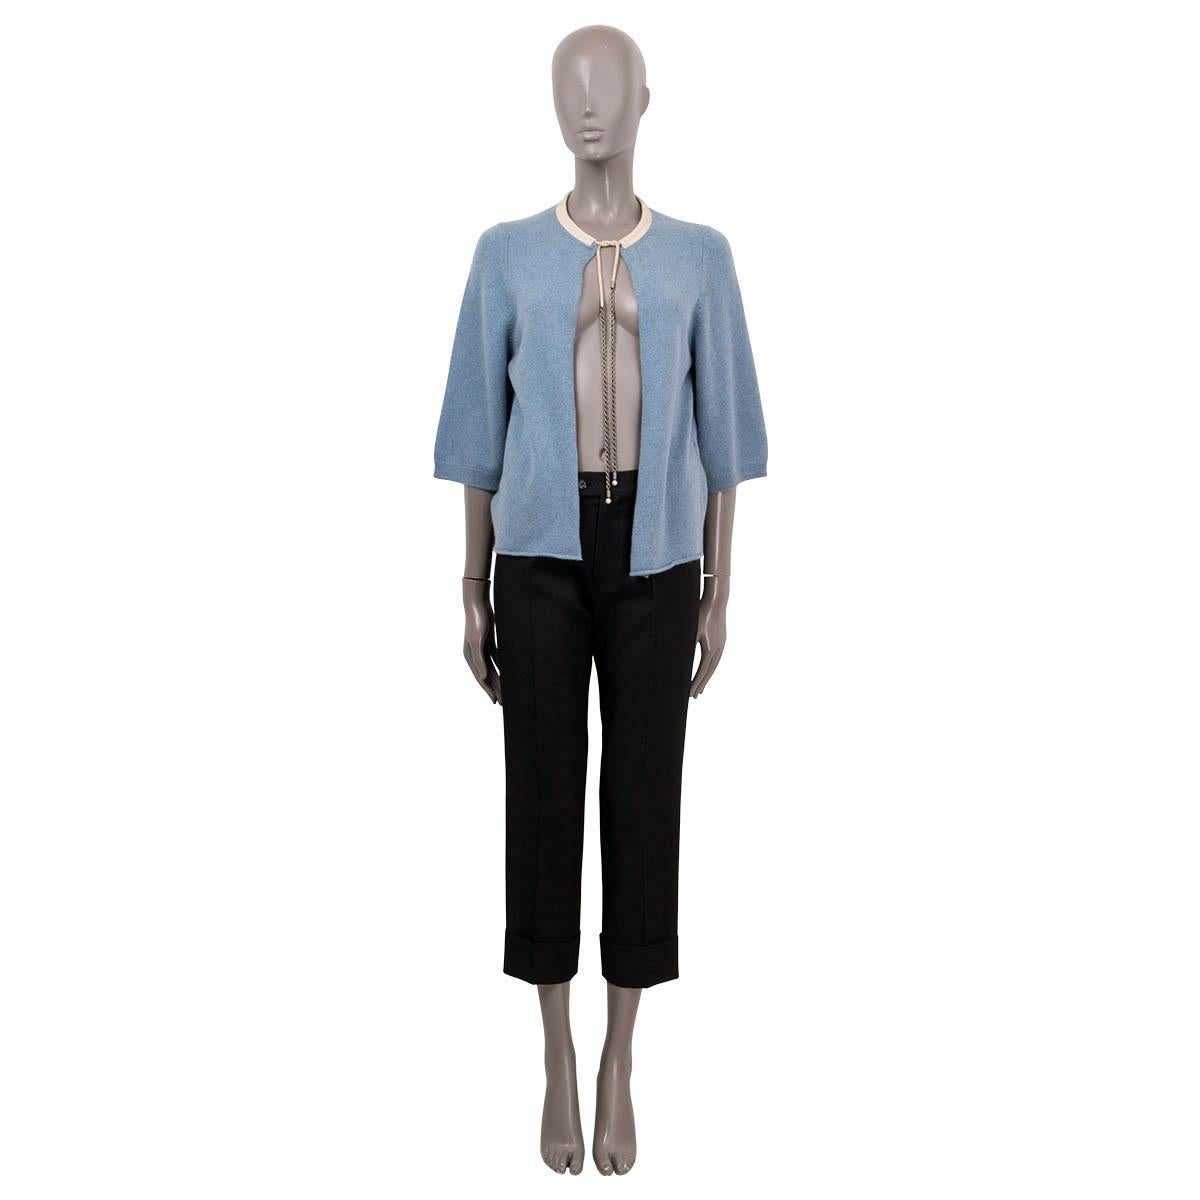 100% authentic Chanel open cardigan in light blue cashmere (100%). Features a round neck and 3/4 sleeves. Closes with a drawstring neck chain on the front in beige and metal. Has been worn and is in excellent condition.

Chanel